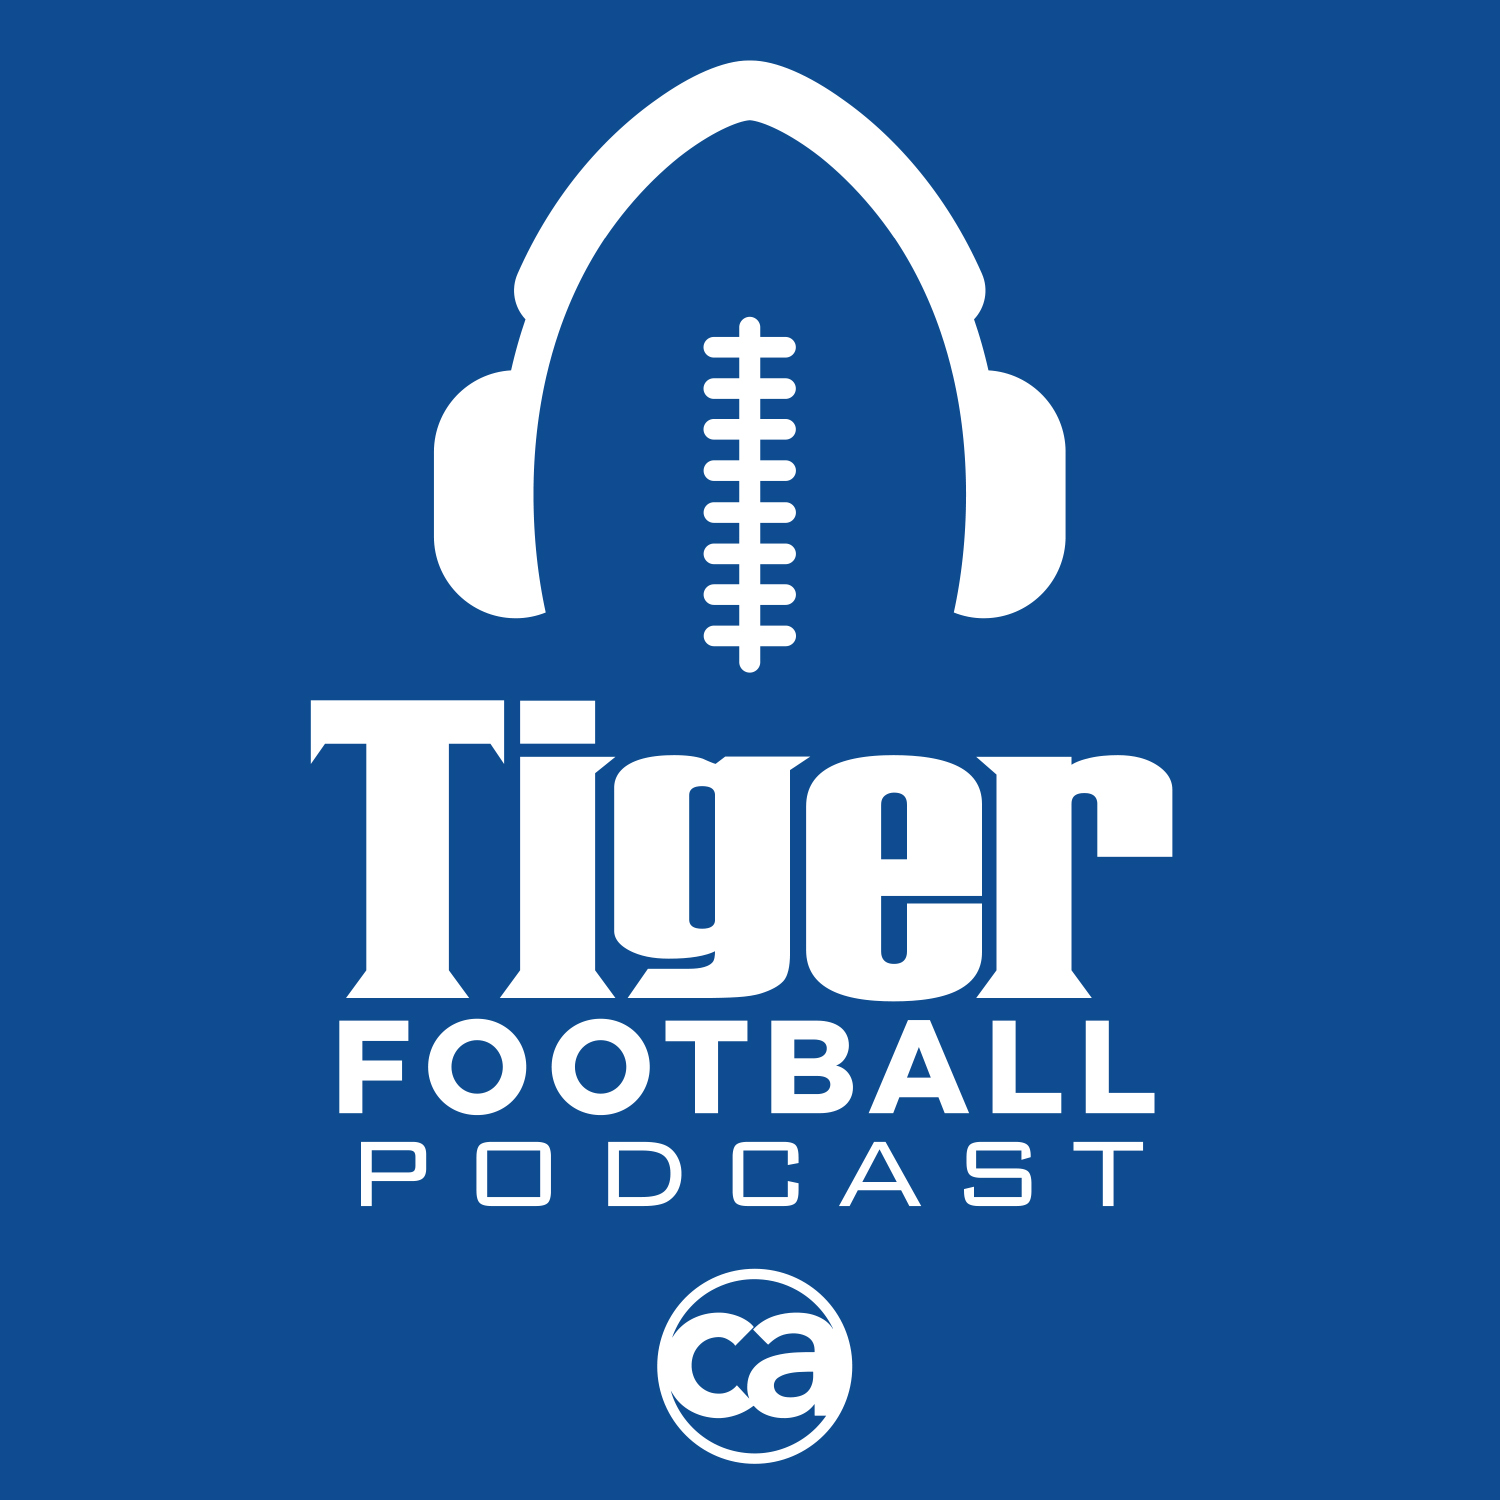 Tiger Football Podcast: Can Memphis finish 2019 as top 10 defense?